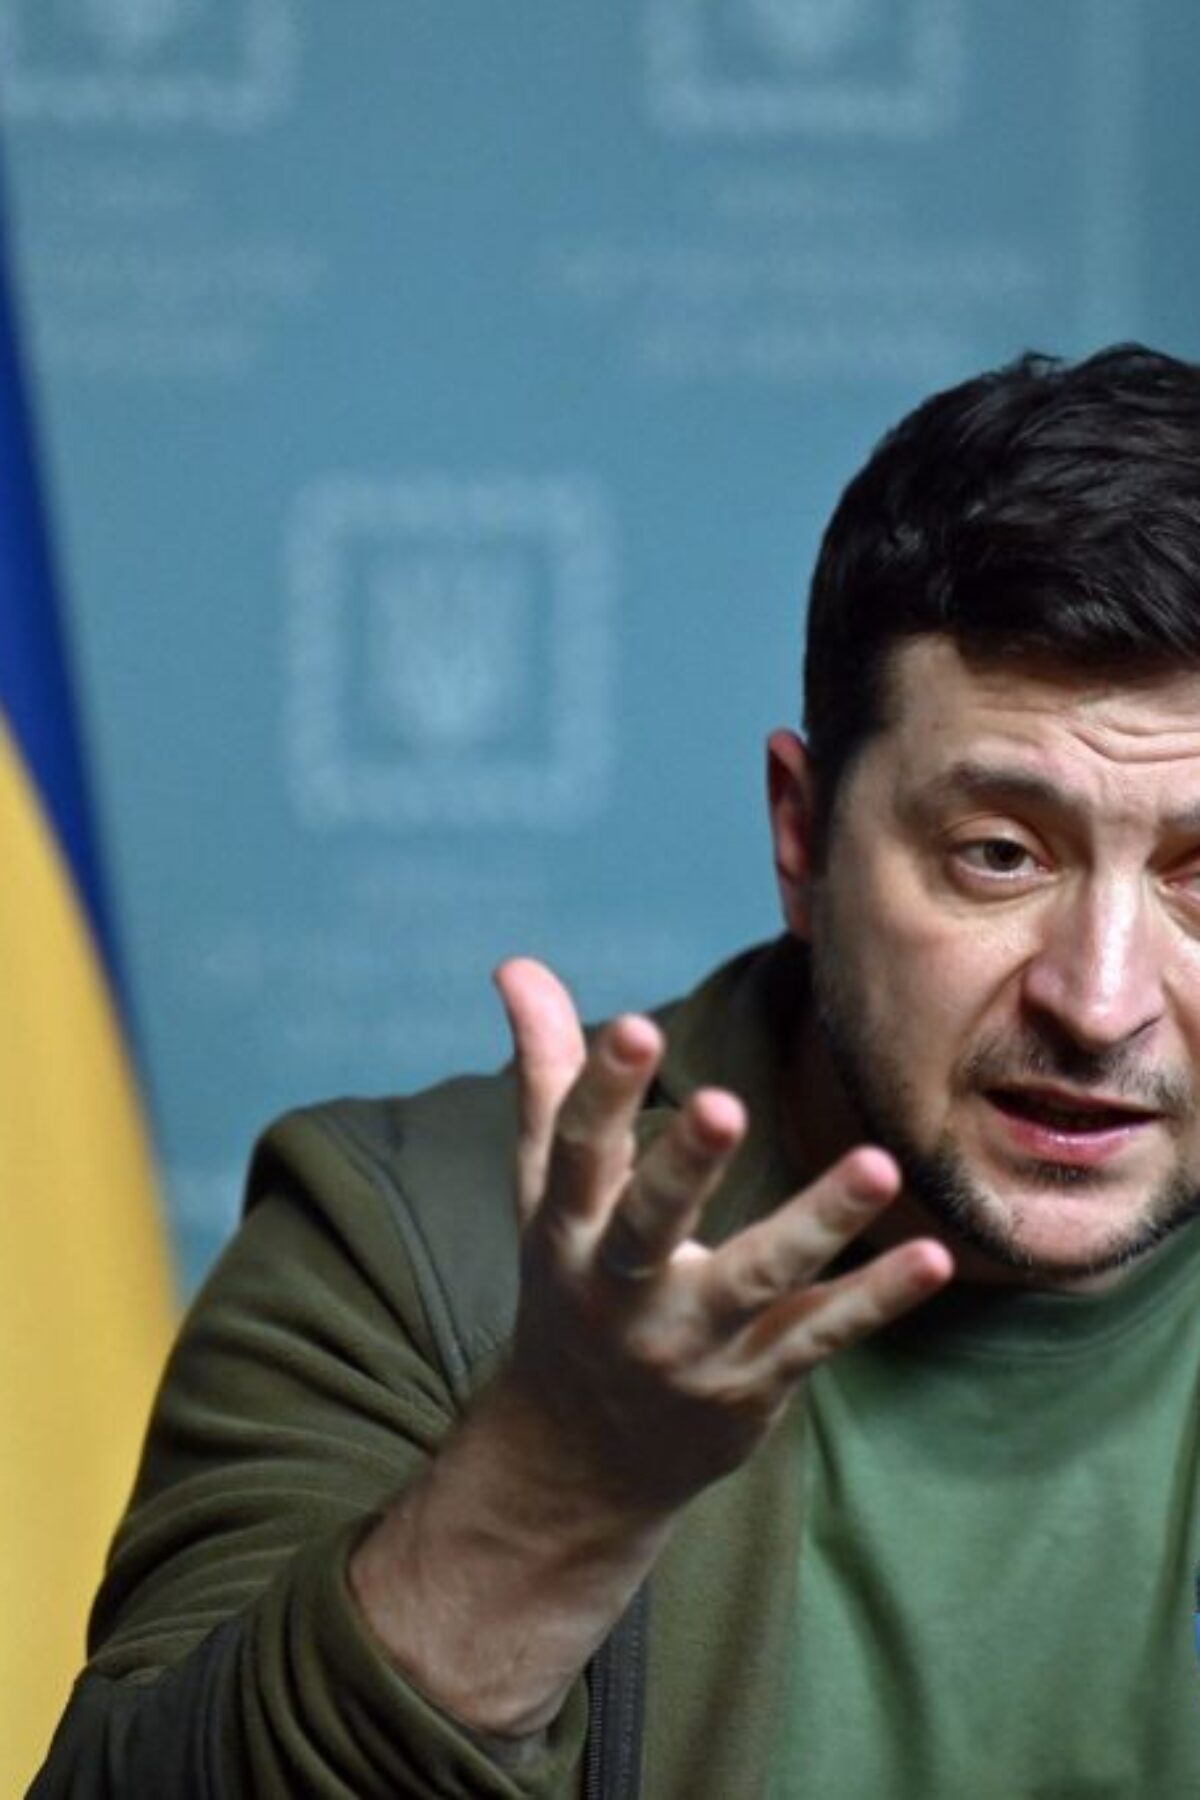 Ukrainian President Volodymyr Zelensky speaks during a press conference in Kyiv on March 3, 2022. - Ukraine President Volodymyr Zelensky called on the West on March 3, 2022, to increase military aid to Ukraine, saying Russia would advance on the rest of Europe otherwise. 